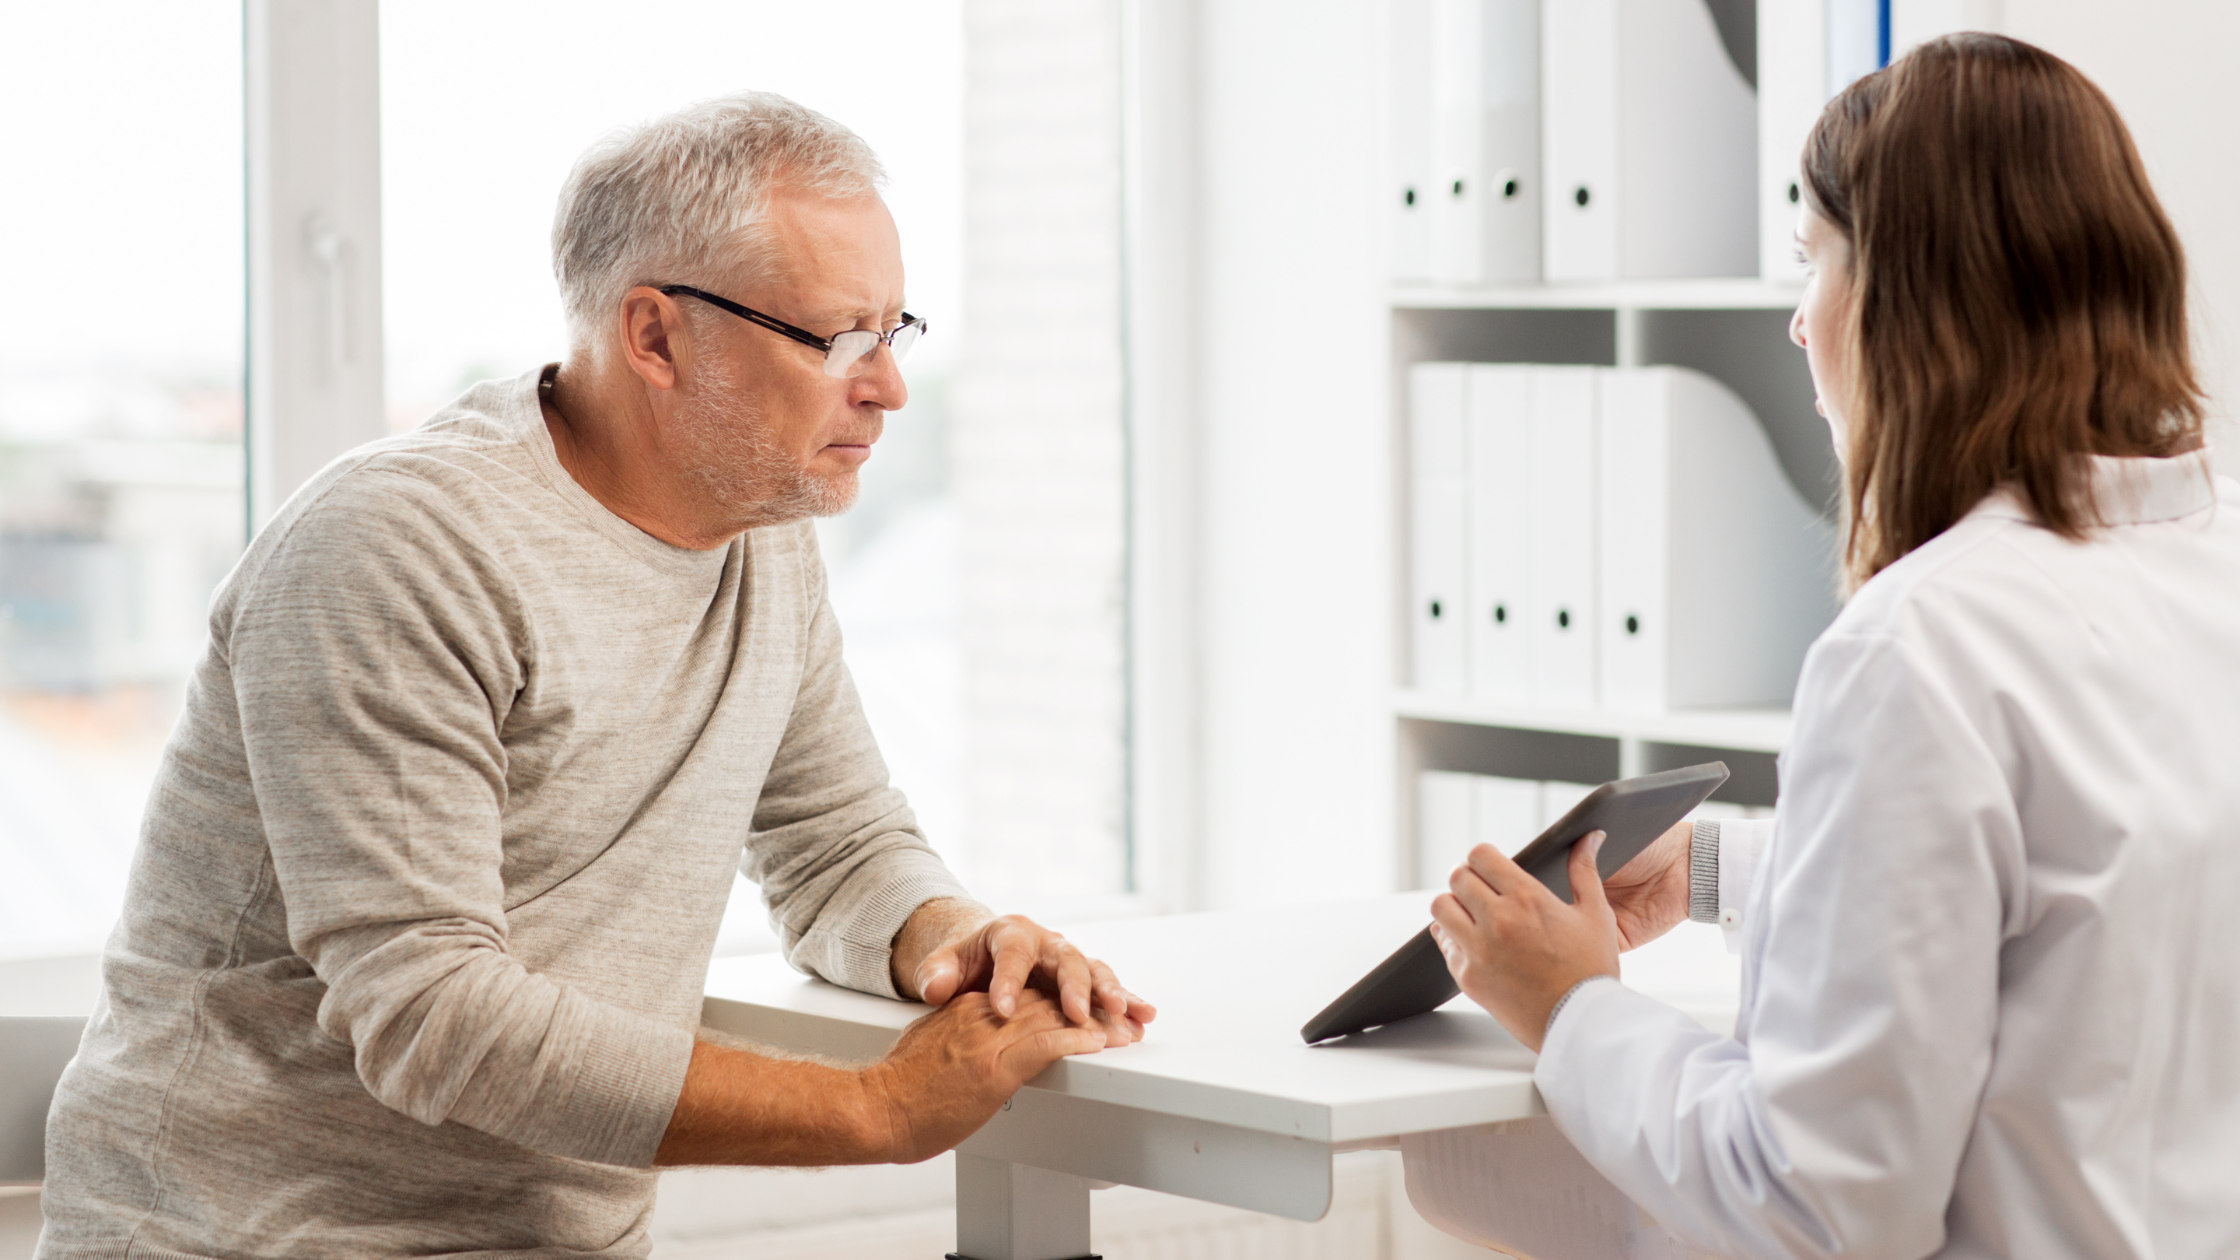 doctor shows senior man something on a tablet while she speaks to him